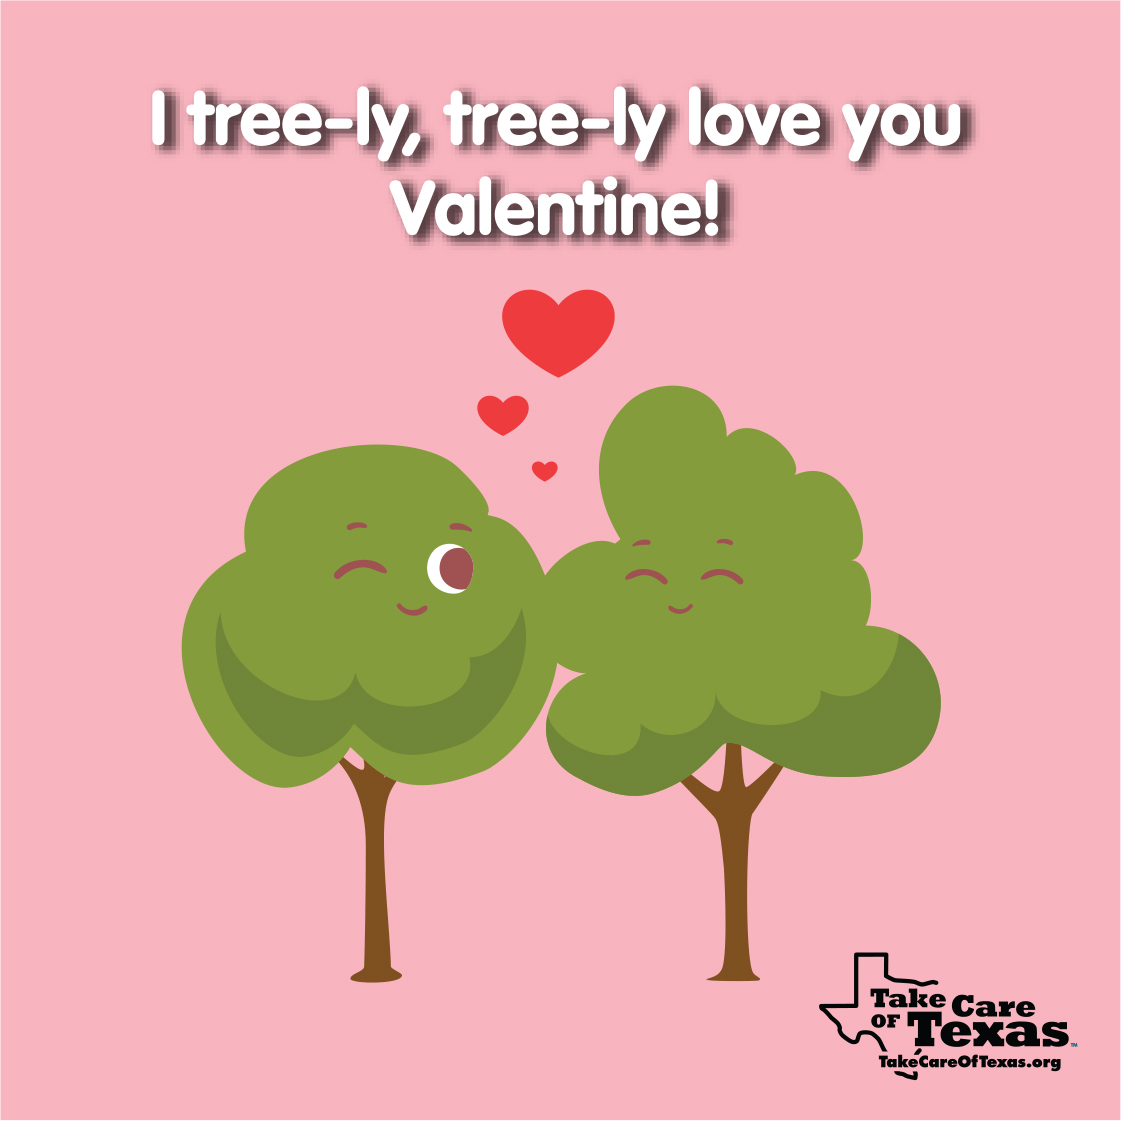 Trees with the text "I tree-ly, tree-ly love you, Valentine!"